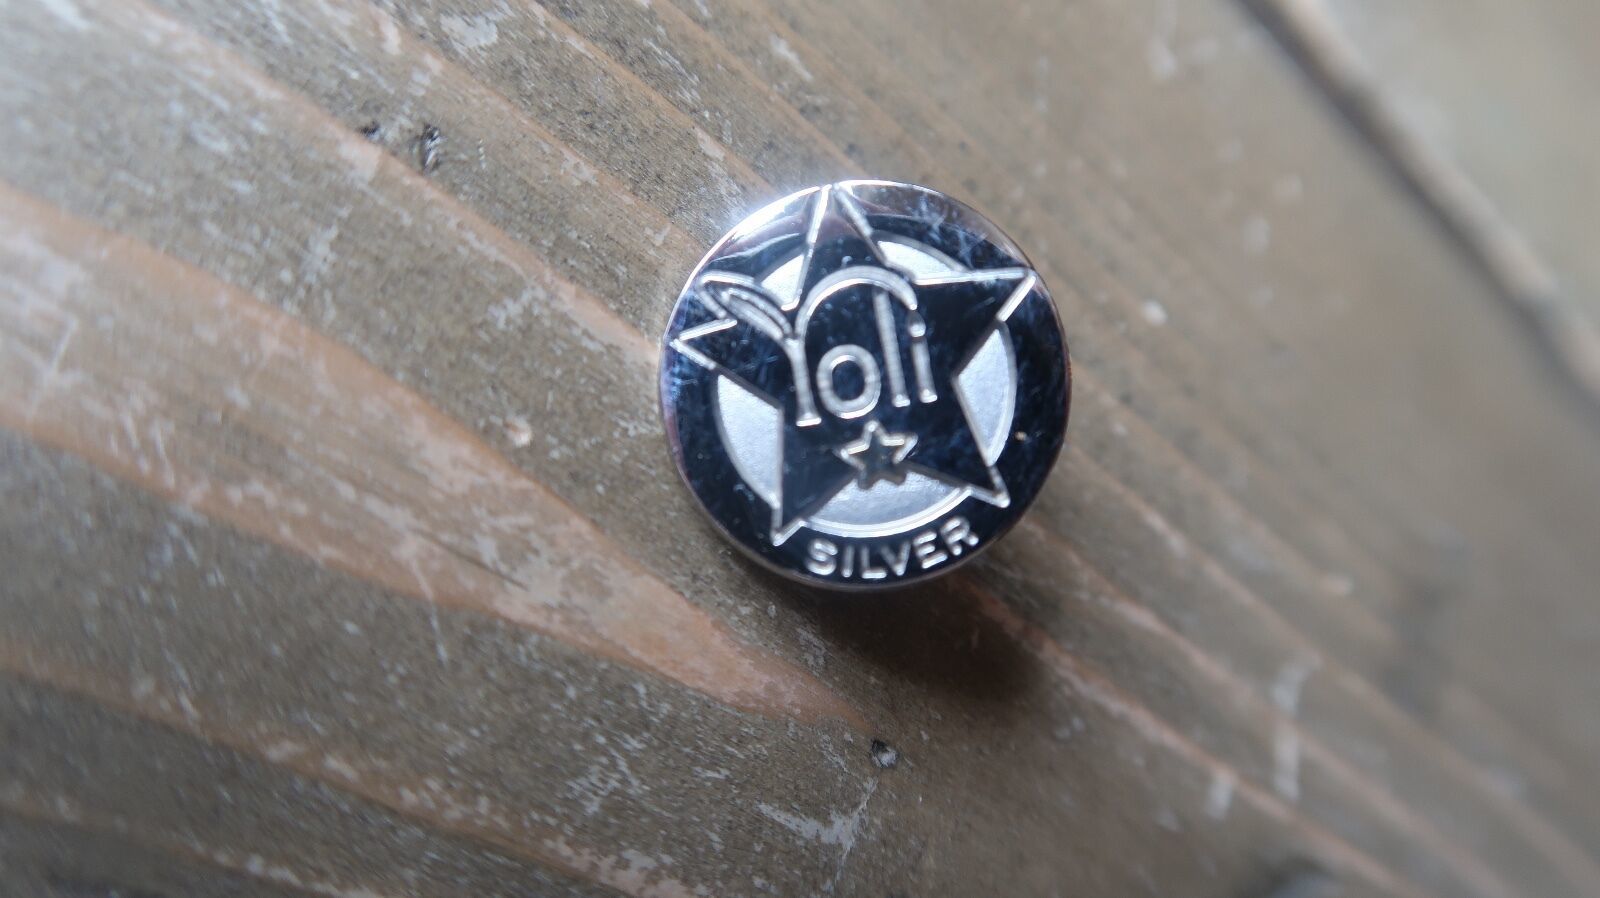 Primary image for YOLI Better Body Company Silver Star Pin 3/4 inch